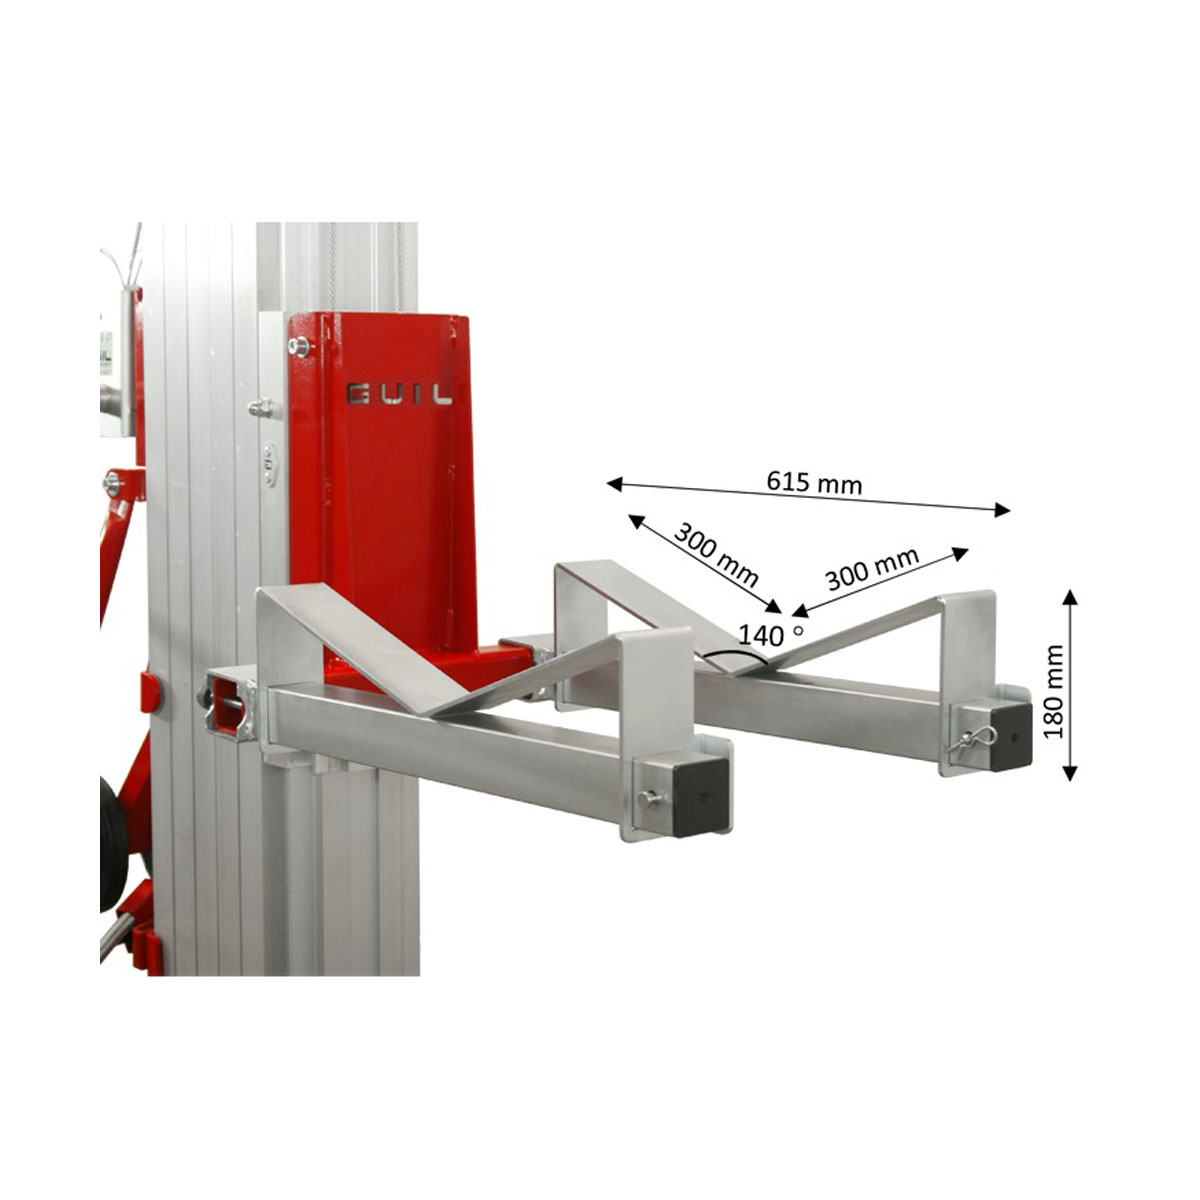 Buy Pipe Cradle Attachment for GUIL Utility Lift Equipment in Utility Lifters | Materials Handling Lift Towers from GUIL available at Astrolift NZ